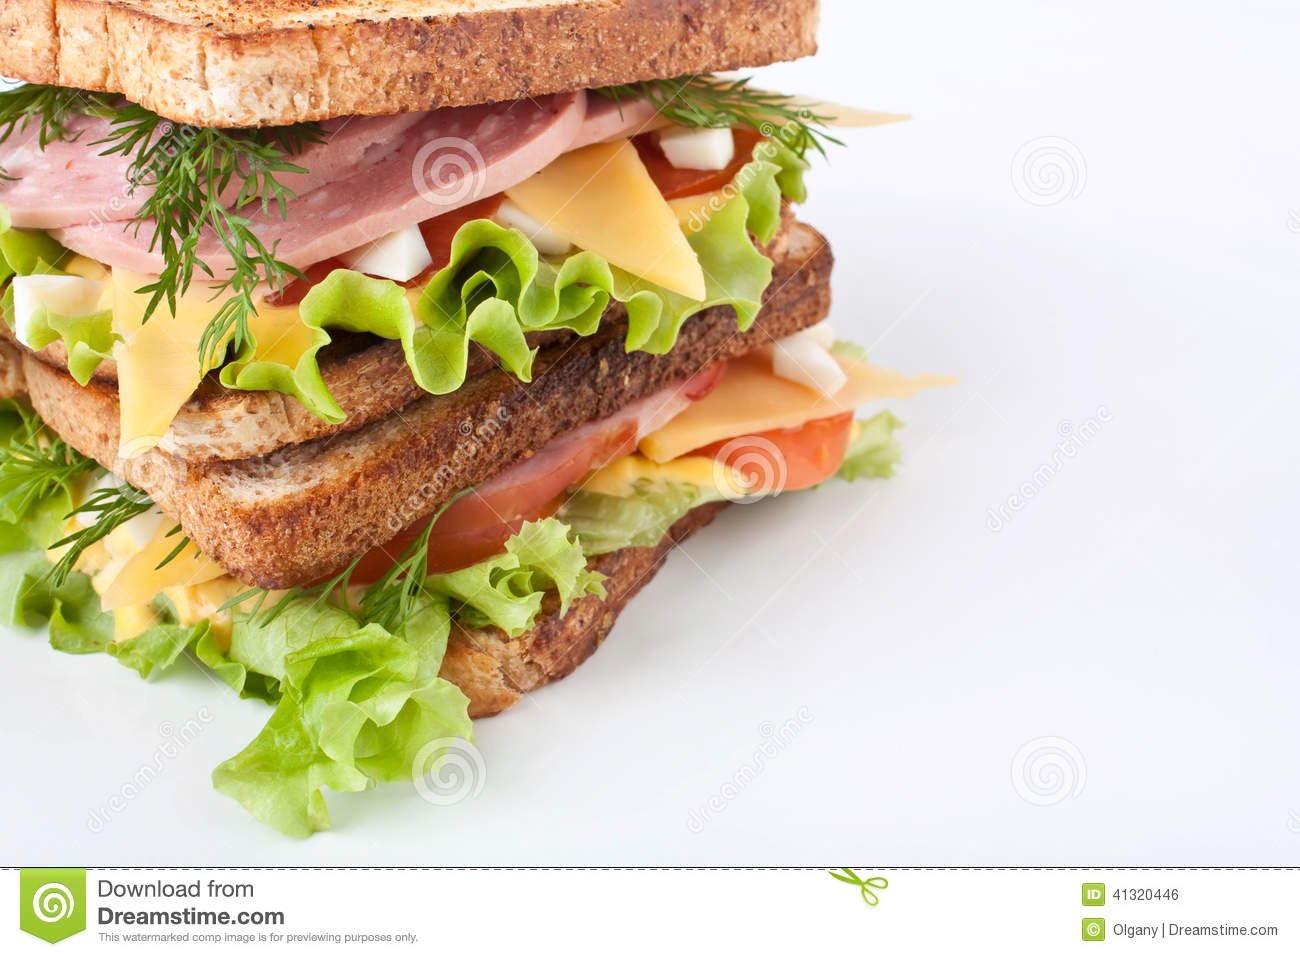 Meat Lettuce Cheese And Egg Salad Big Sandwich On Toasted Bread